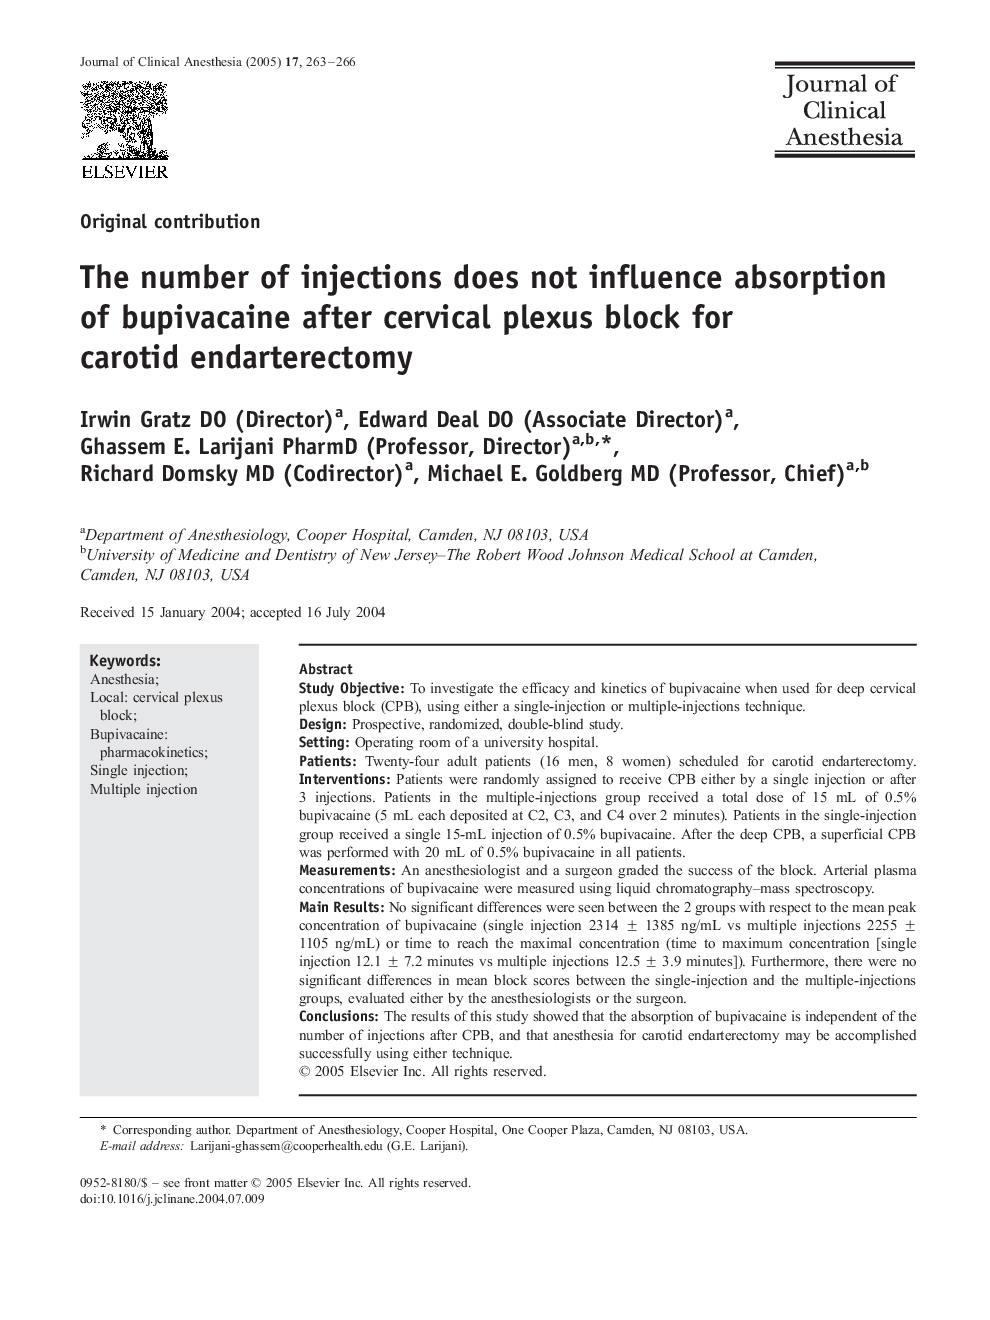 The number of injections does not influence absorption of bupivacaine after cervical plexus block for carotid endarterectomy